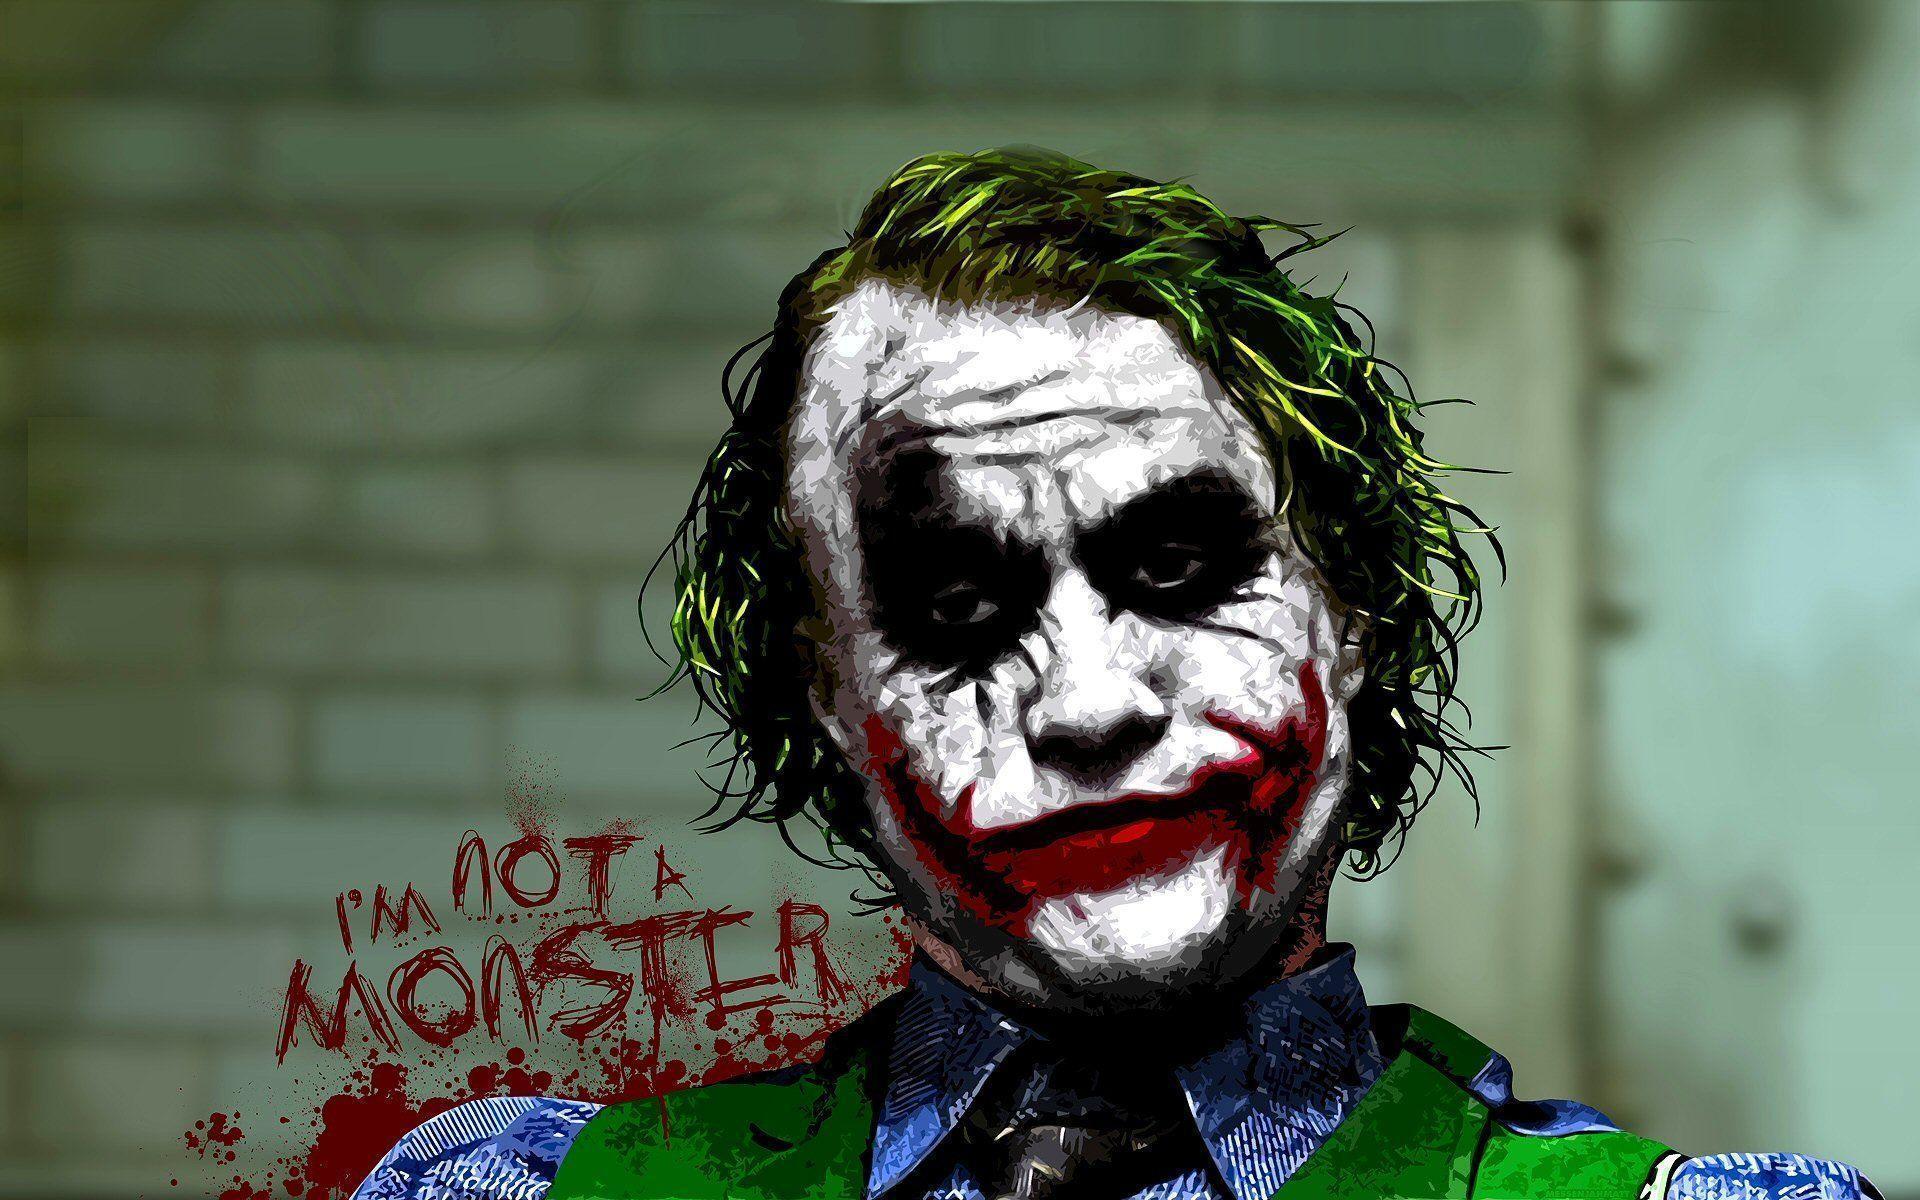 Bad Boy Joker Image HD See More on. Importent Note Style